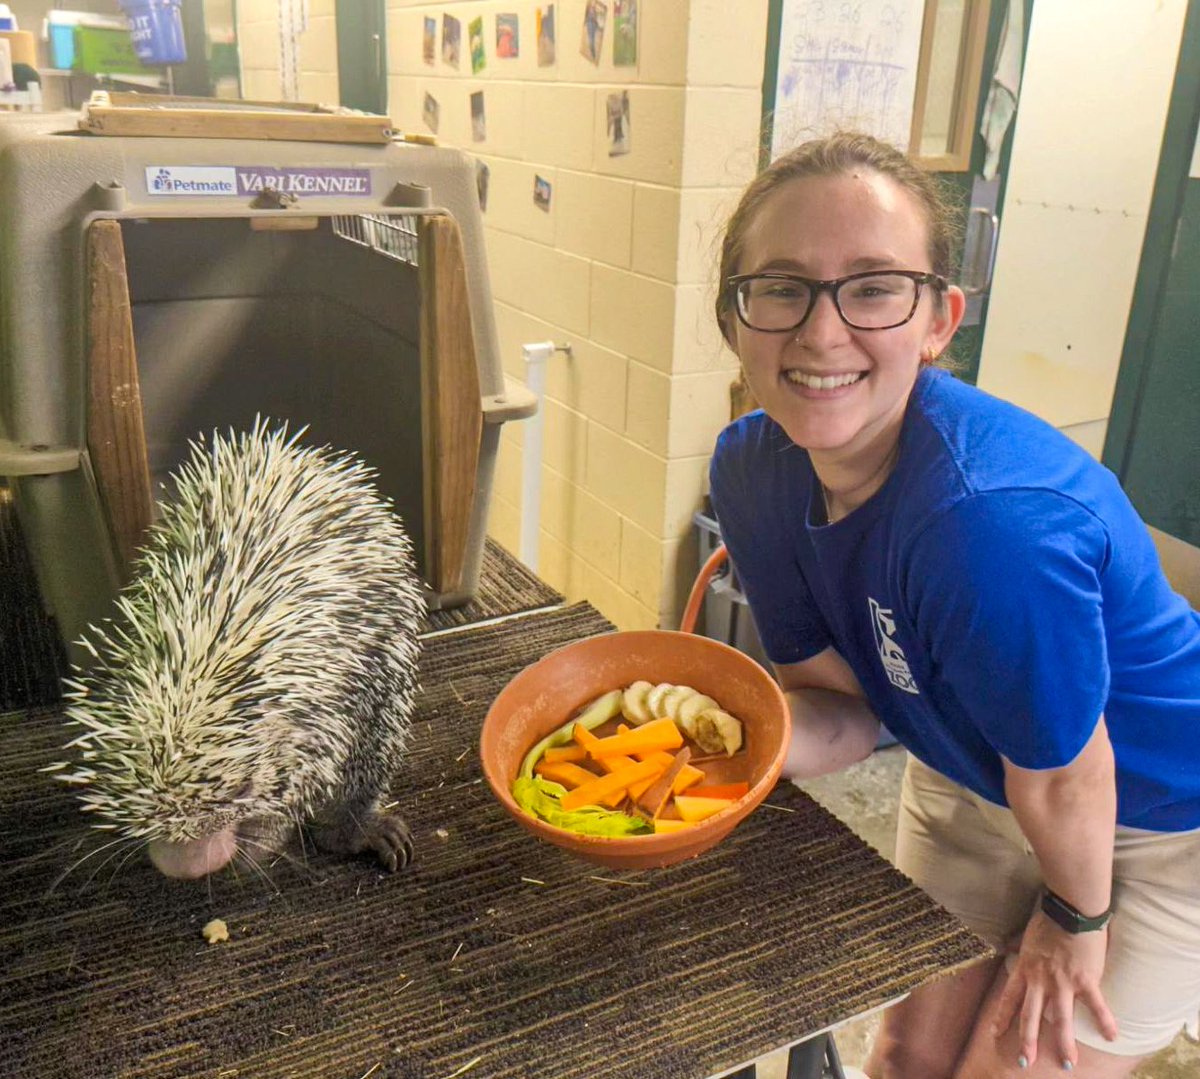 Our Zookeepers give CharCUTErie boards a whole new meaning! 🥗

Trying to find stimulating and enriching ways to feed George the prehensile-tailed porcupine, keeper Emily has been making him yummy and healthy charcuterie boards! #NZKW2023